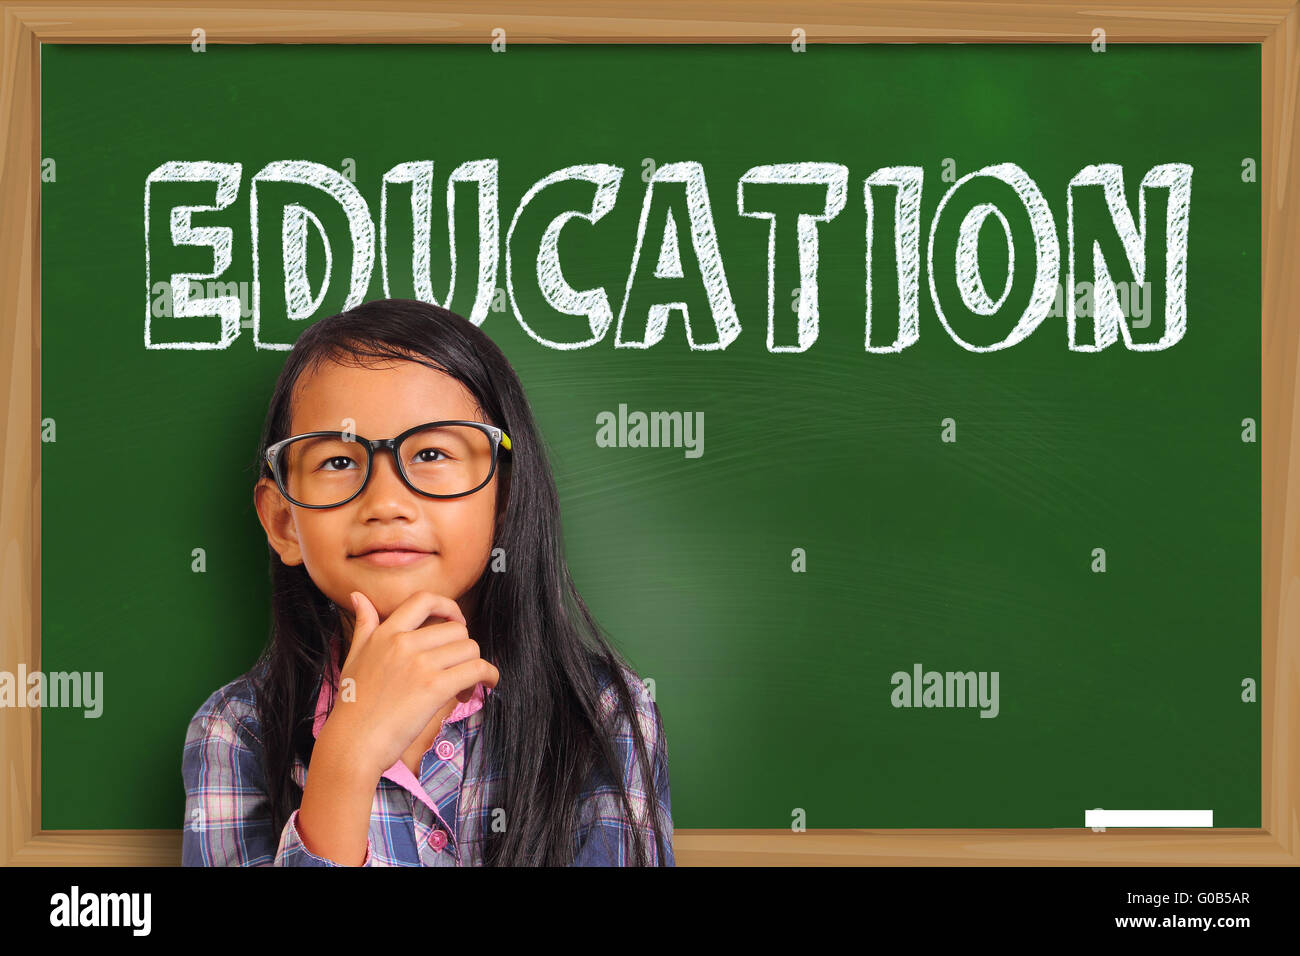 Little Asian student girl smiling and thinking over green chalkboard with education word written on it Stock Photo